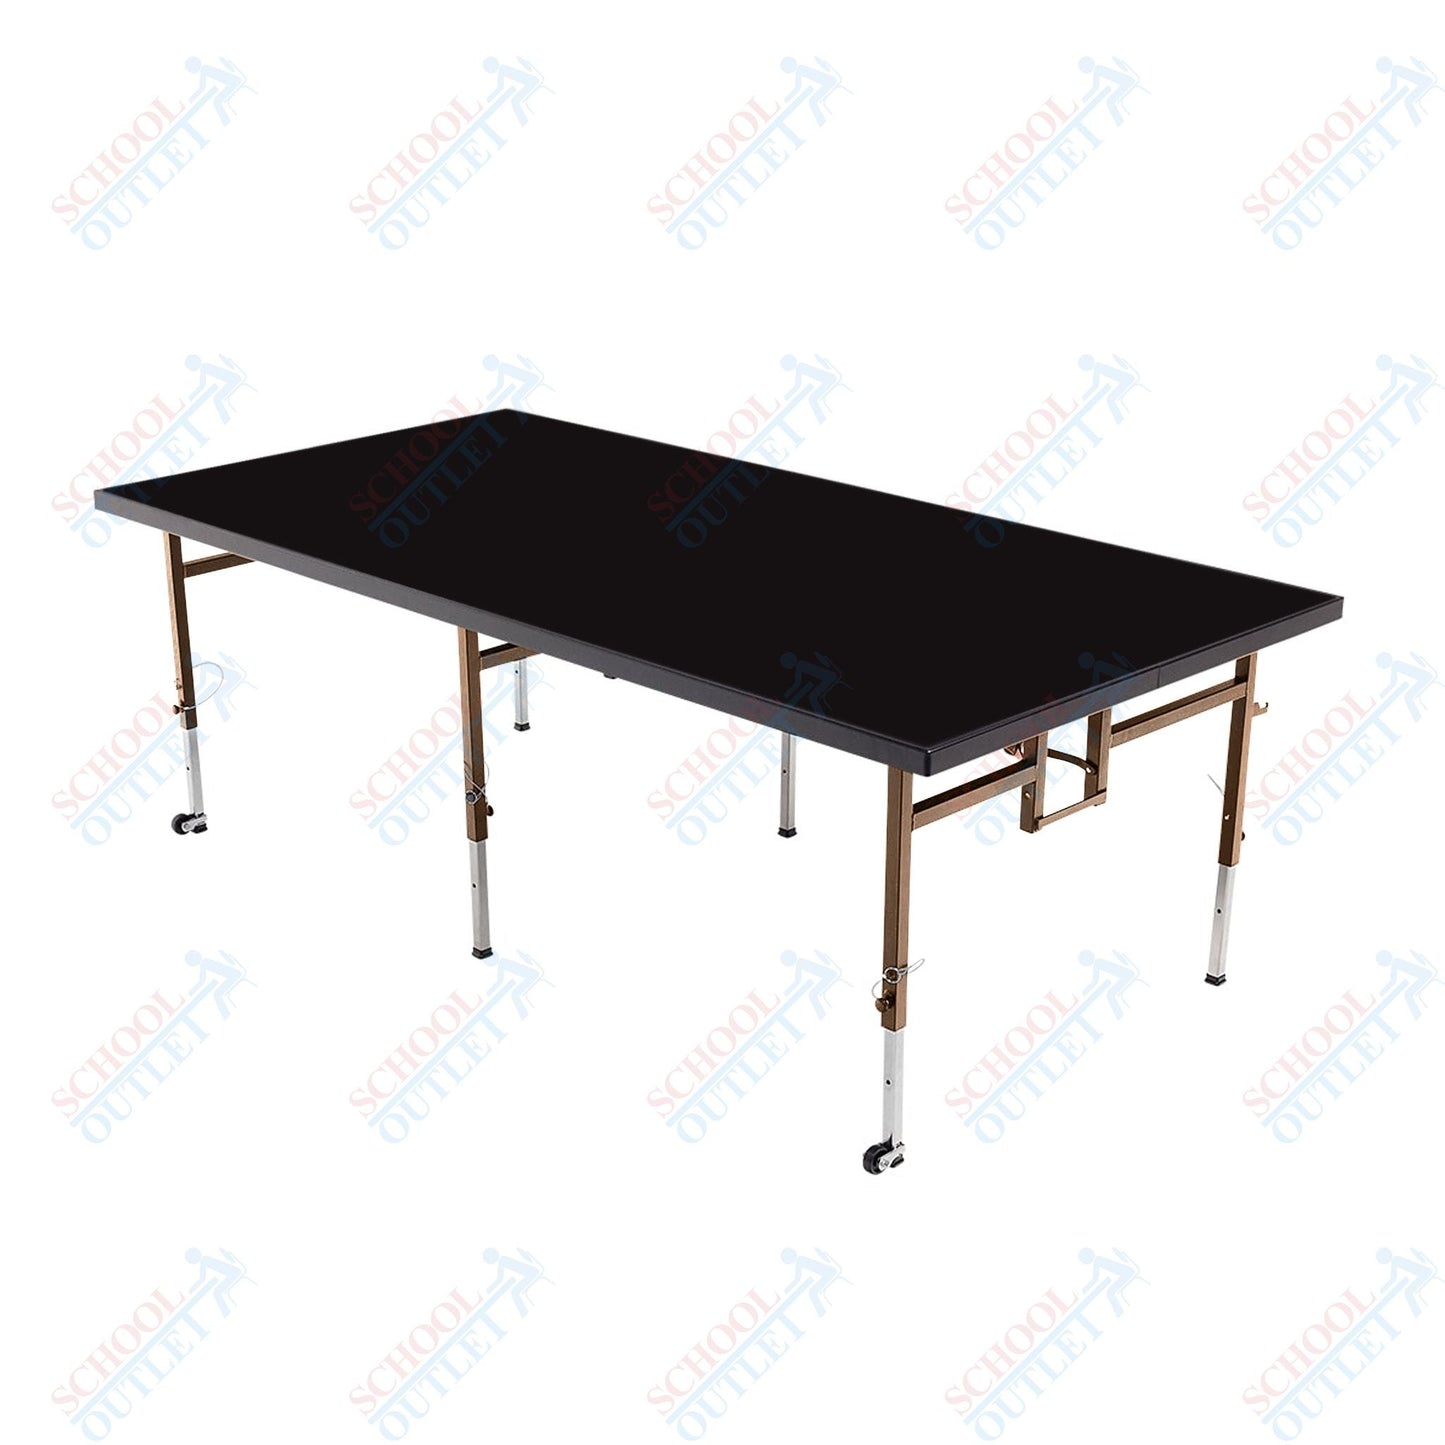 AmTab Adjustable Height Stage - Polypropylene Top - 36"W x 96"L x Adjustable 32" to 40"H (AmTab AMT-STA3832P) - SchoolOutlet